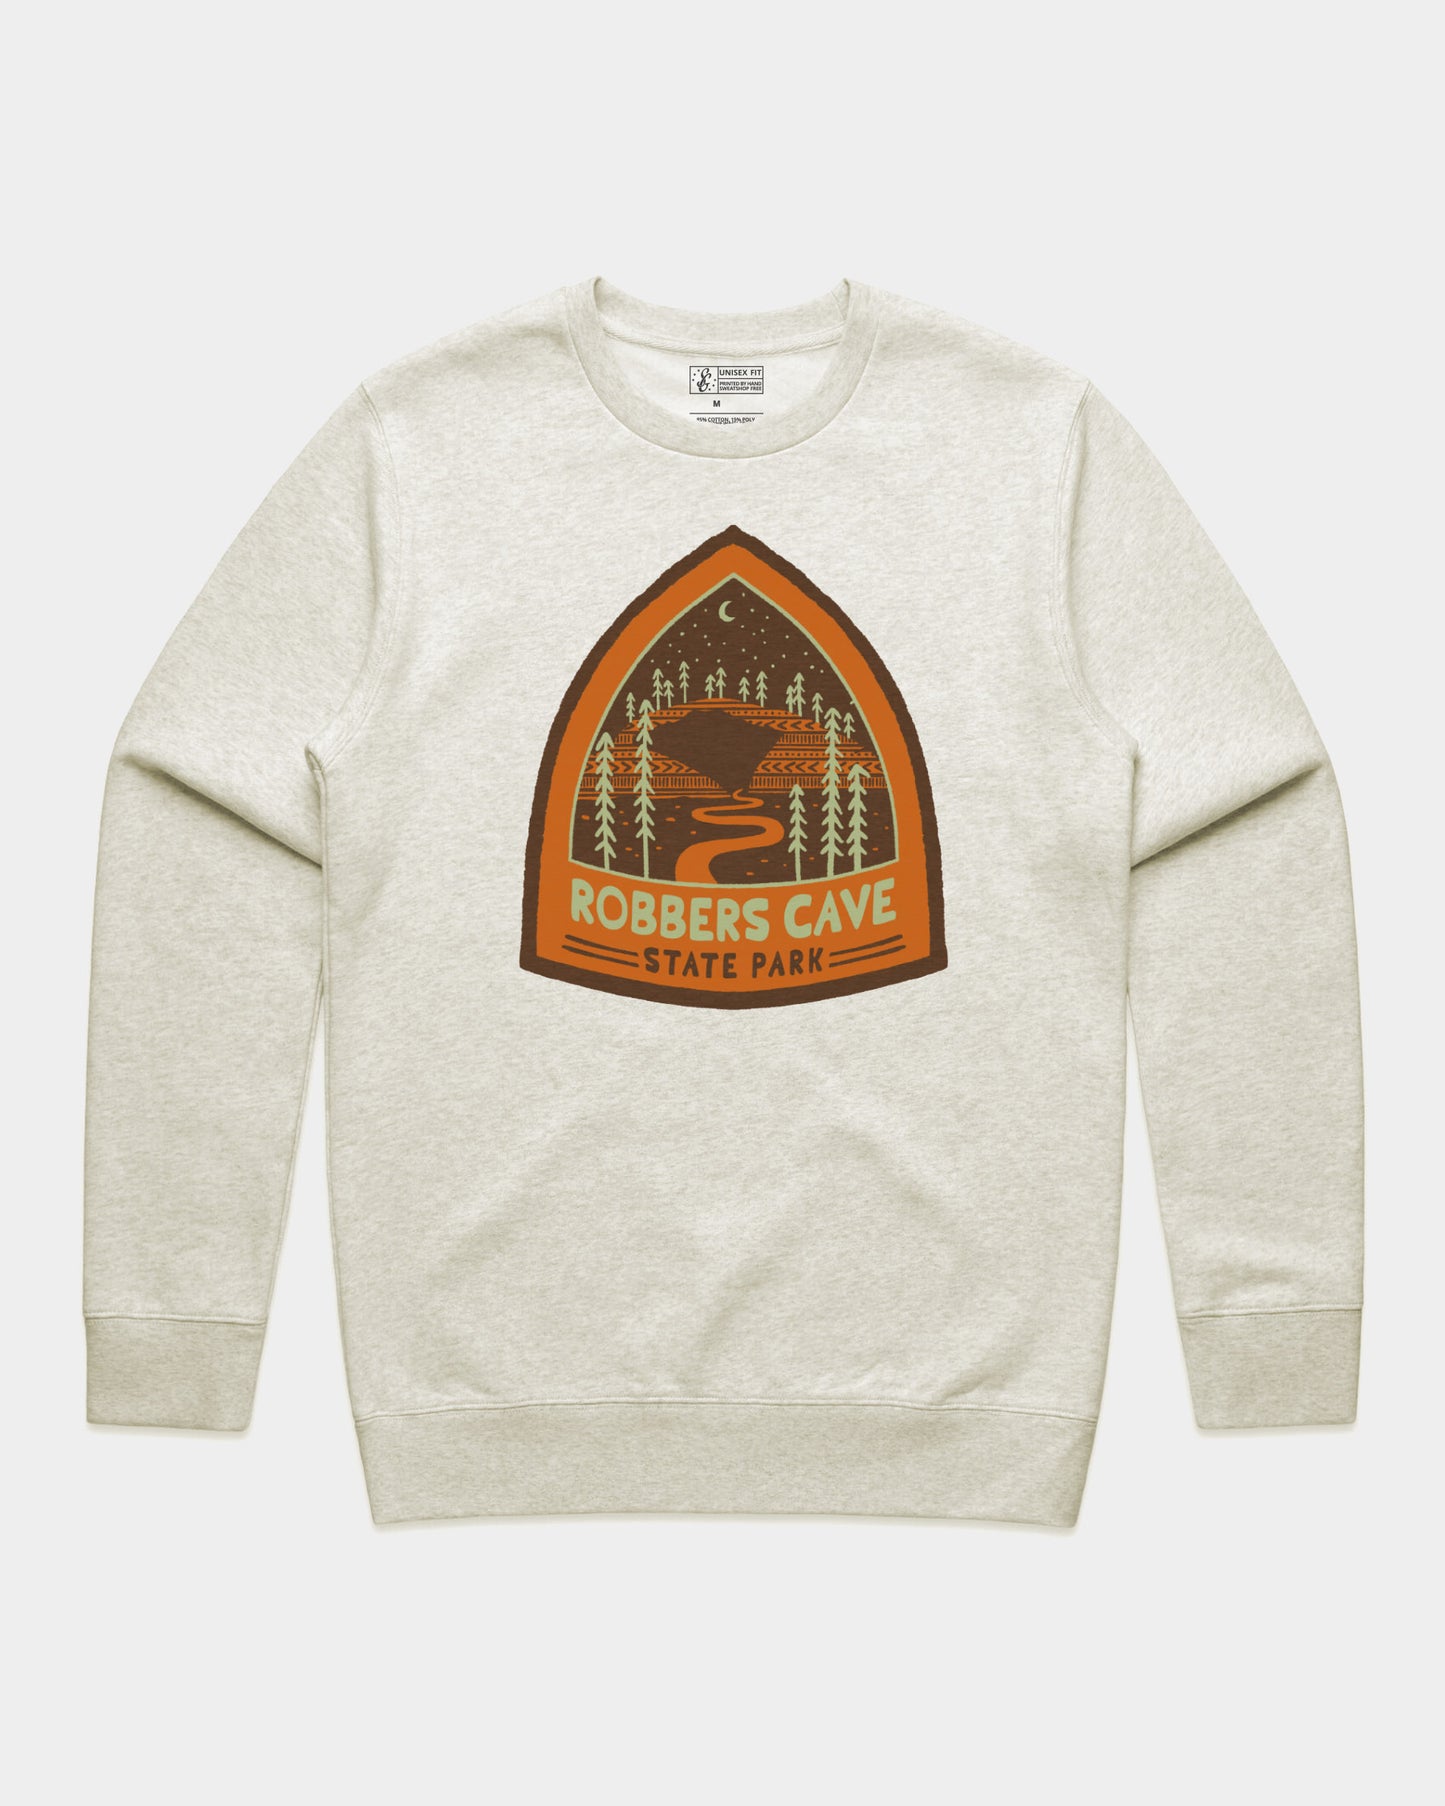 Robbers Cave Ranger Badge Pullover - Oatmeal Heather